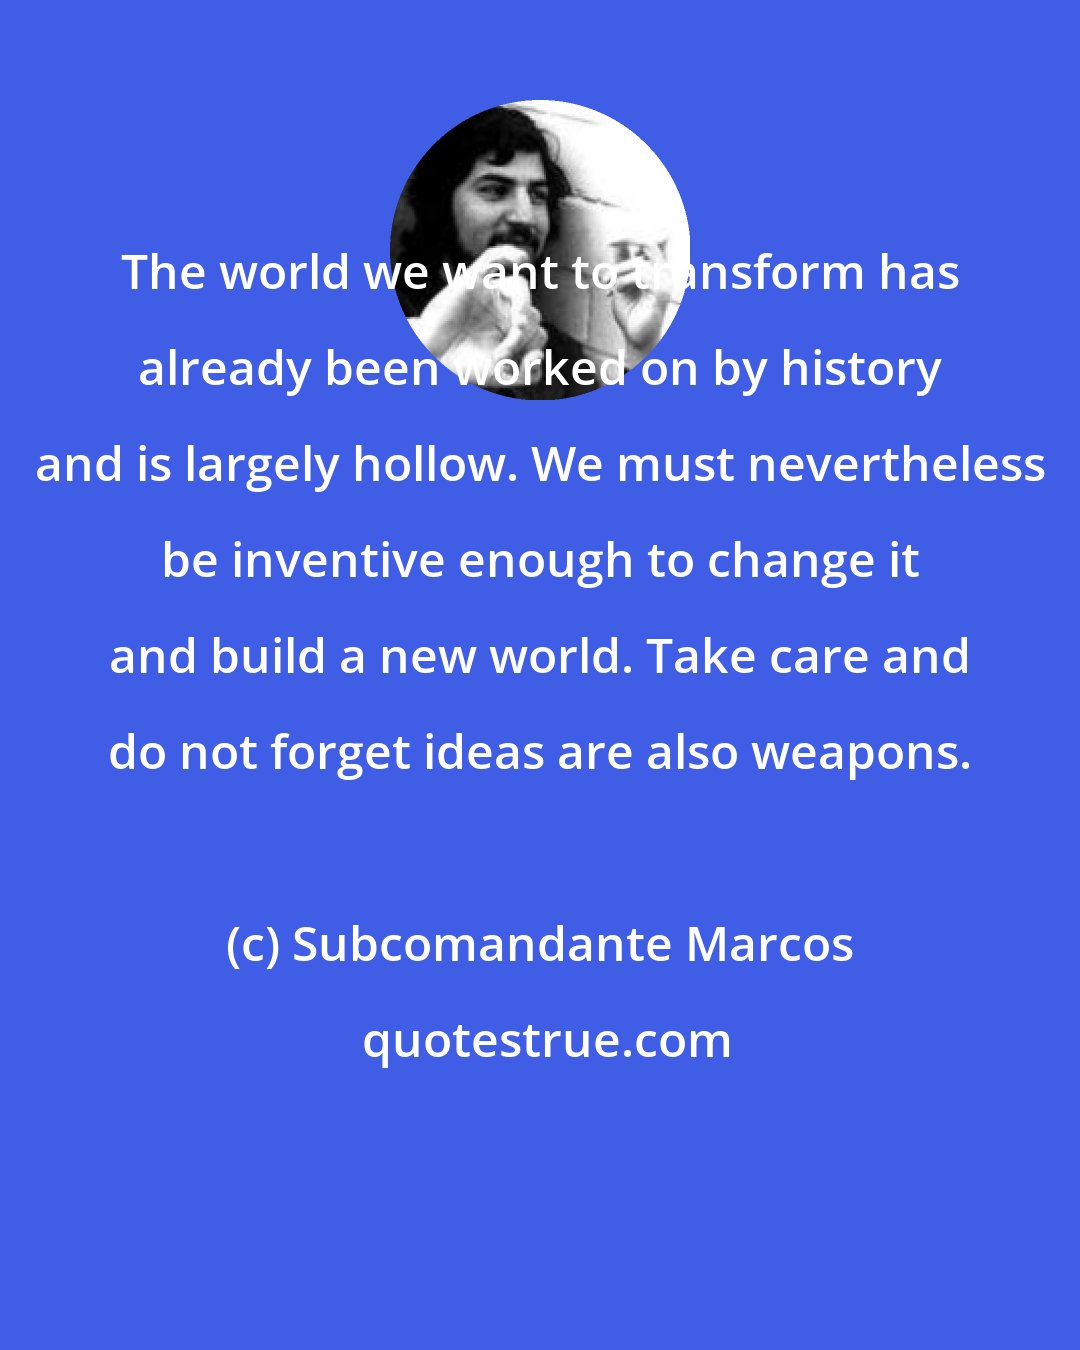 Subcomandante Marcos: The world we want to transform has already been worked on by history and is largely hollow. We must nevertheless be inventive enough to change it and build a new world. Take care and do not forget ideas are also weapons.